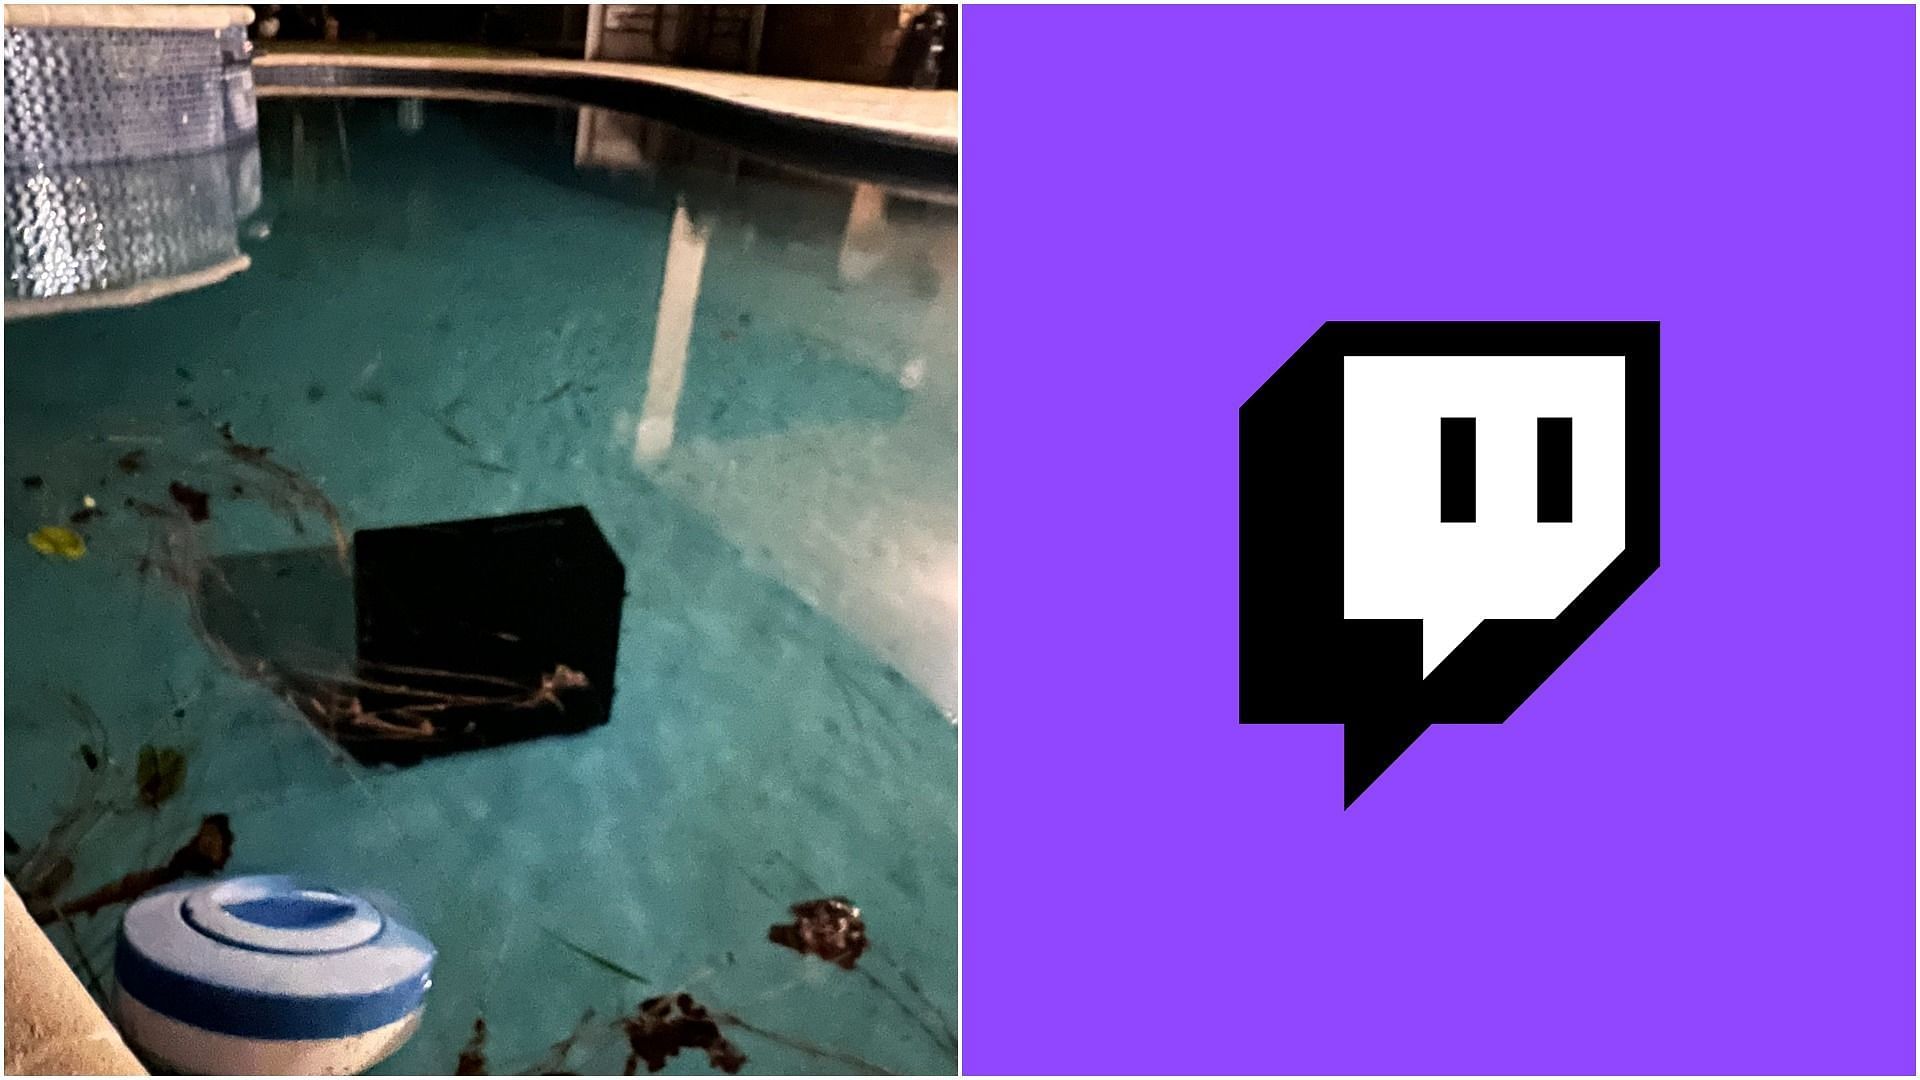 15-year-old Twitch streamer shares that her father threw her PC into a pool (Image via Sportskeeda)